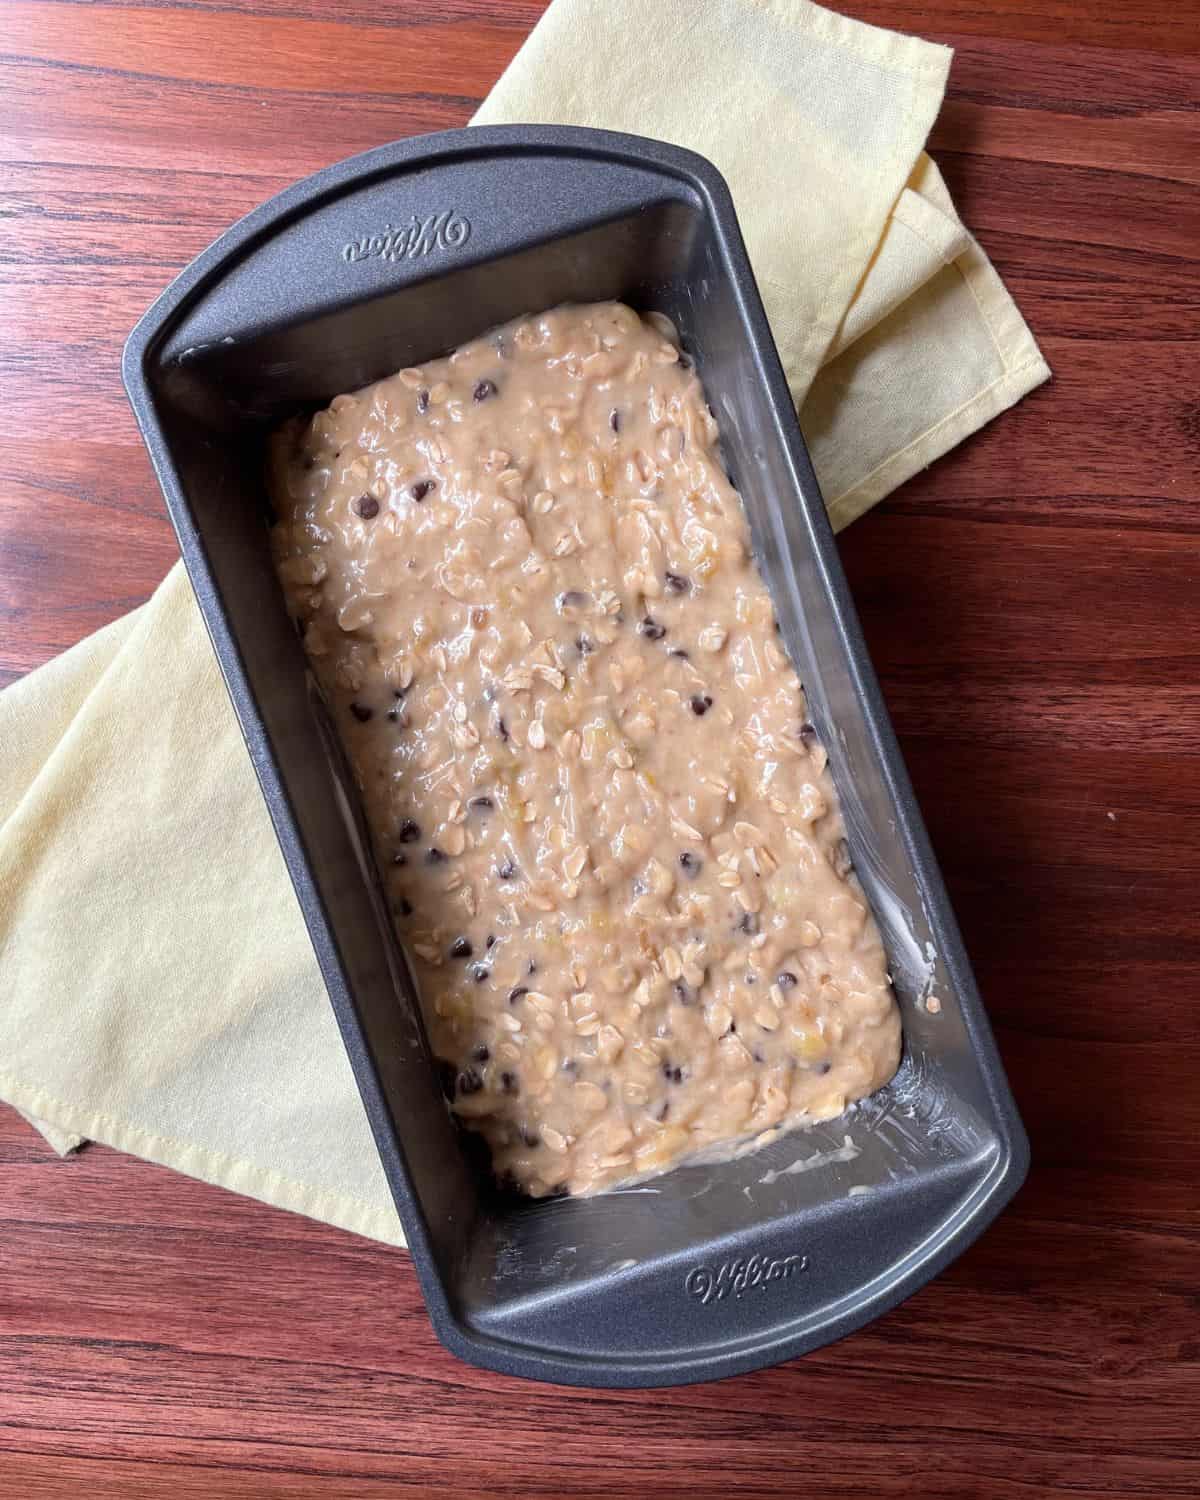 The batter for the Oatmeal Chocolate Chip Banana Bread is poured into a loaf pan.